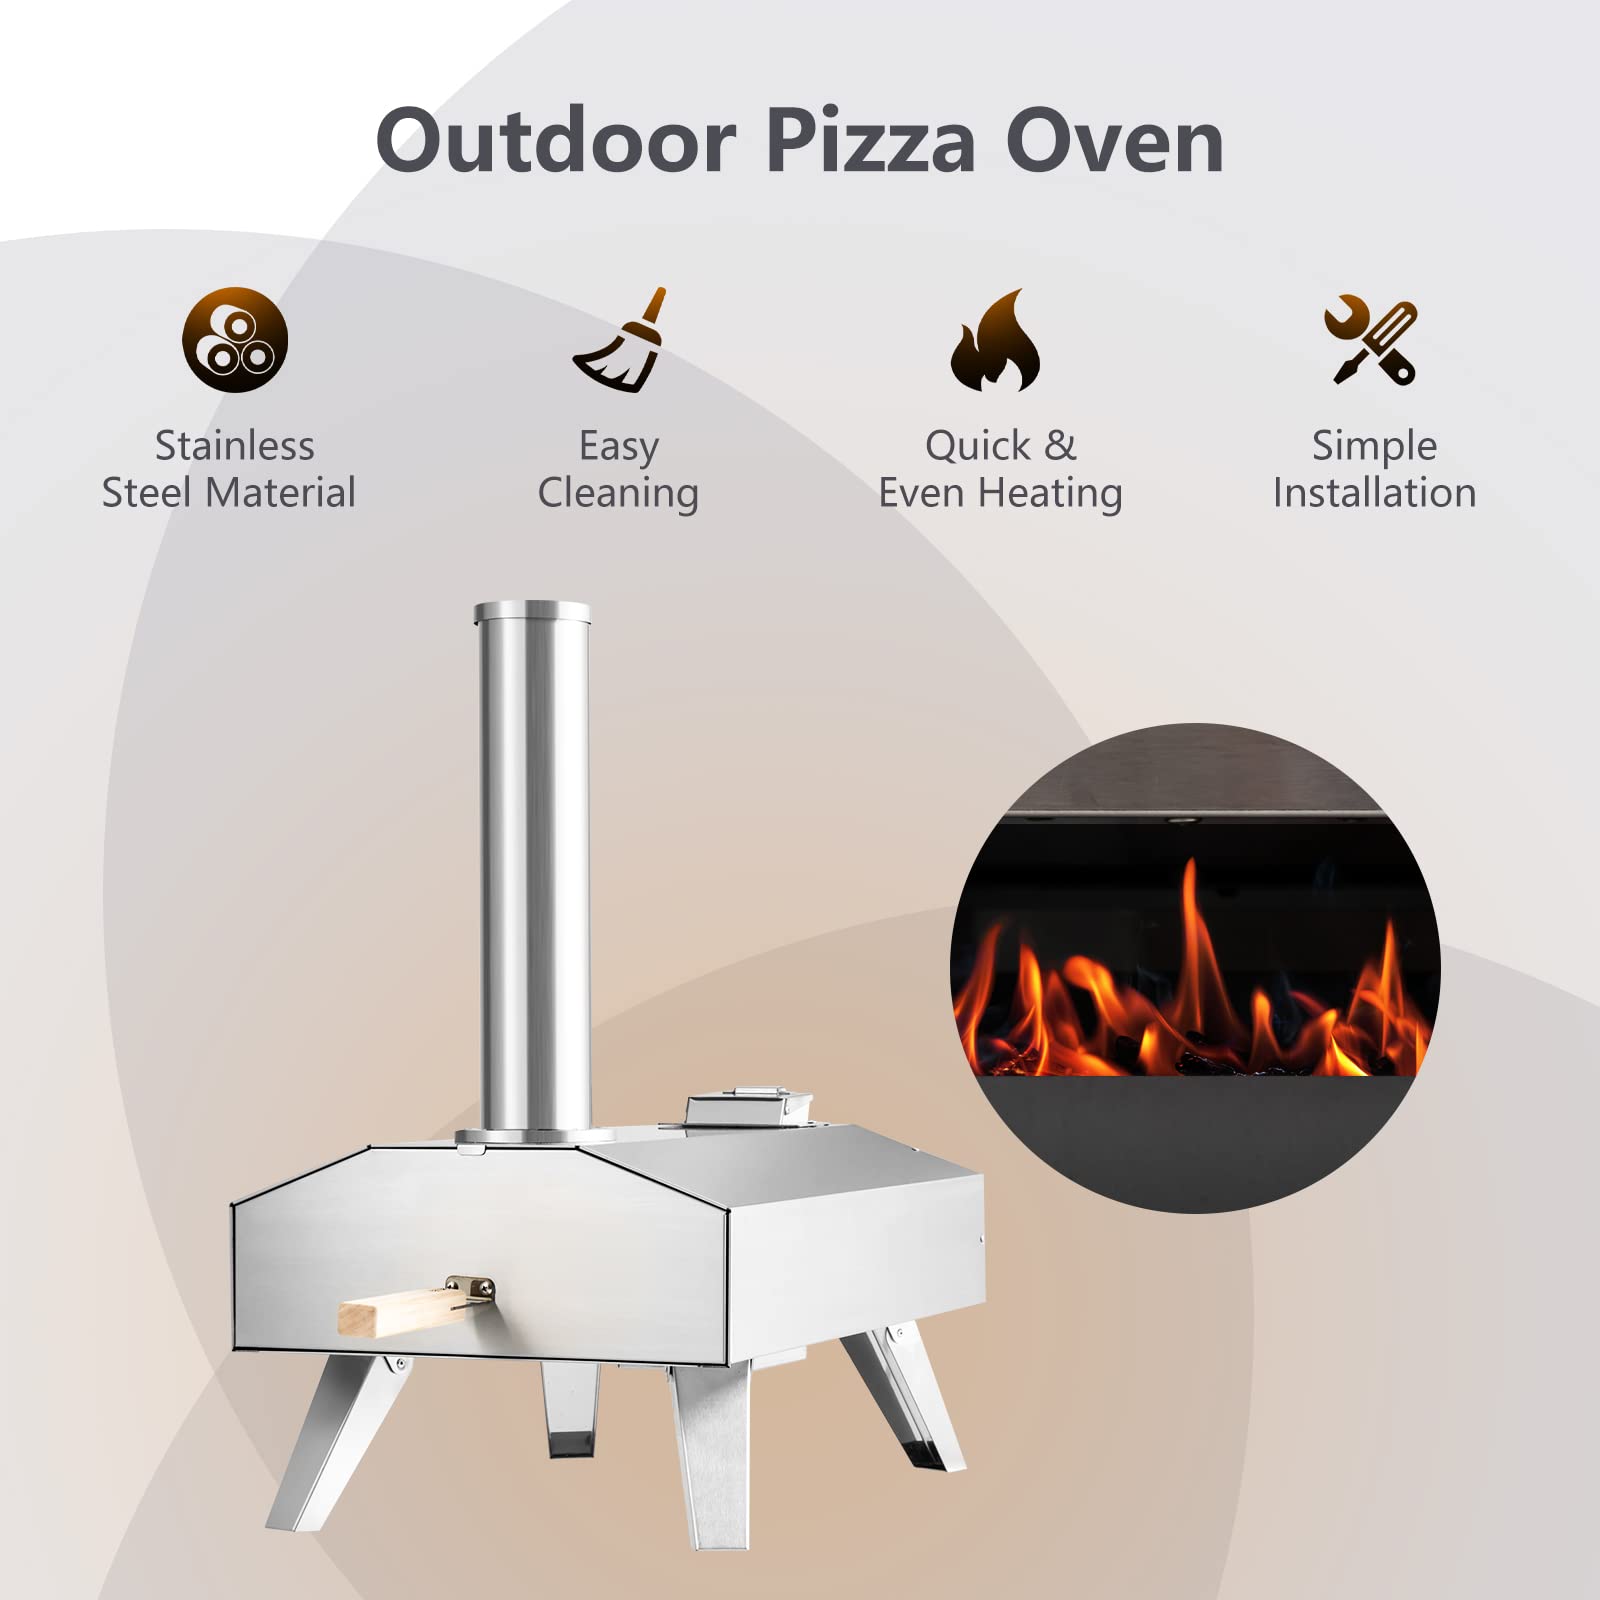 PETSITE Pizza Oven Outdoor, Wood Fired Pizza Oven with 12 Inches Pizza Stone, Portable Stainless Steel Wood Pellet Grill Pizza Maker for Outside Backyard Camping Party Cooking